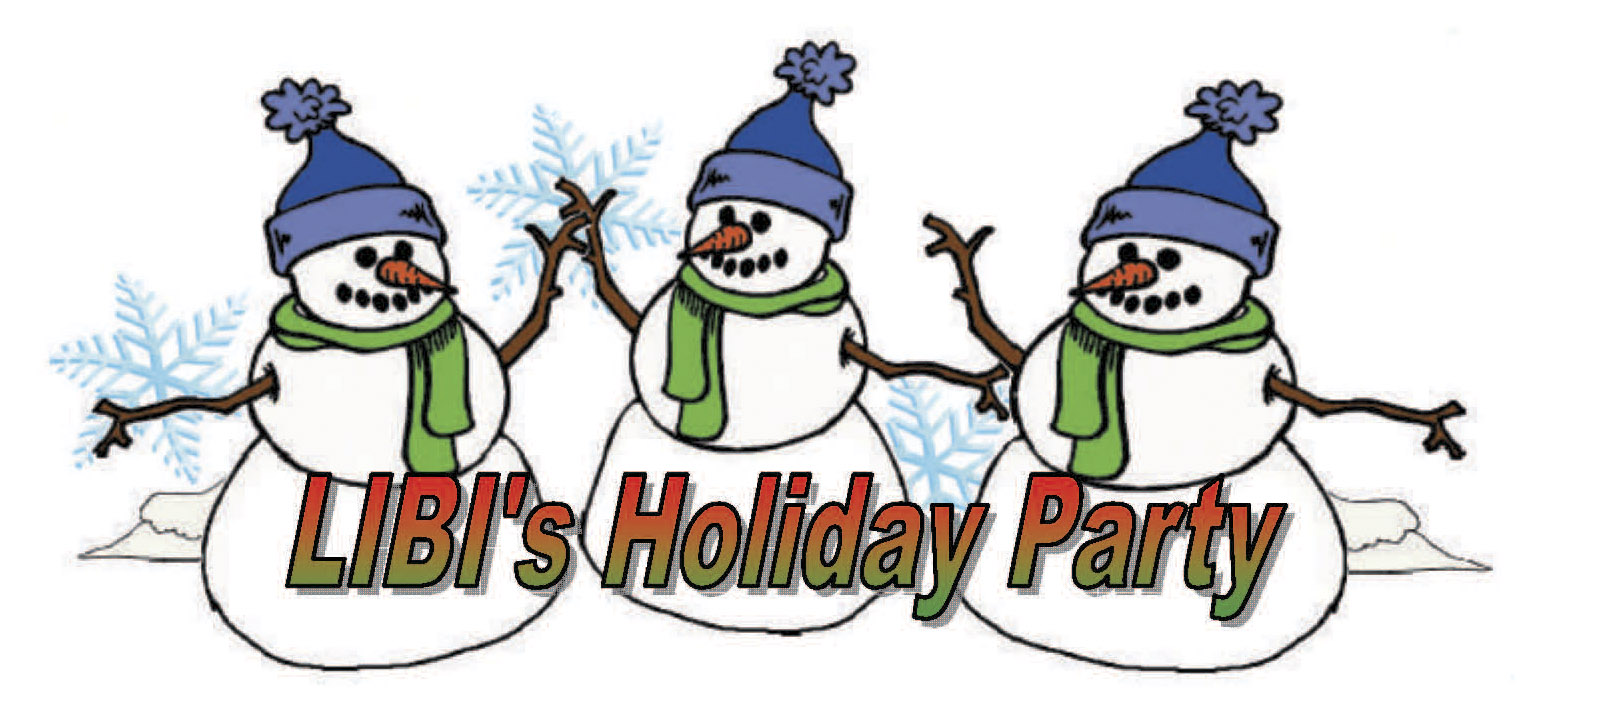 free clipart for holiday parties - photo #28